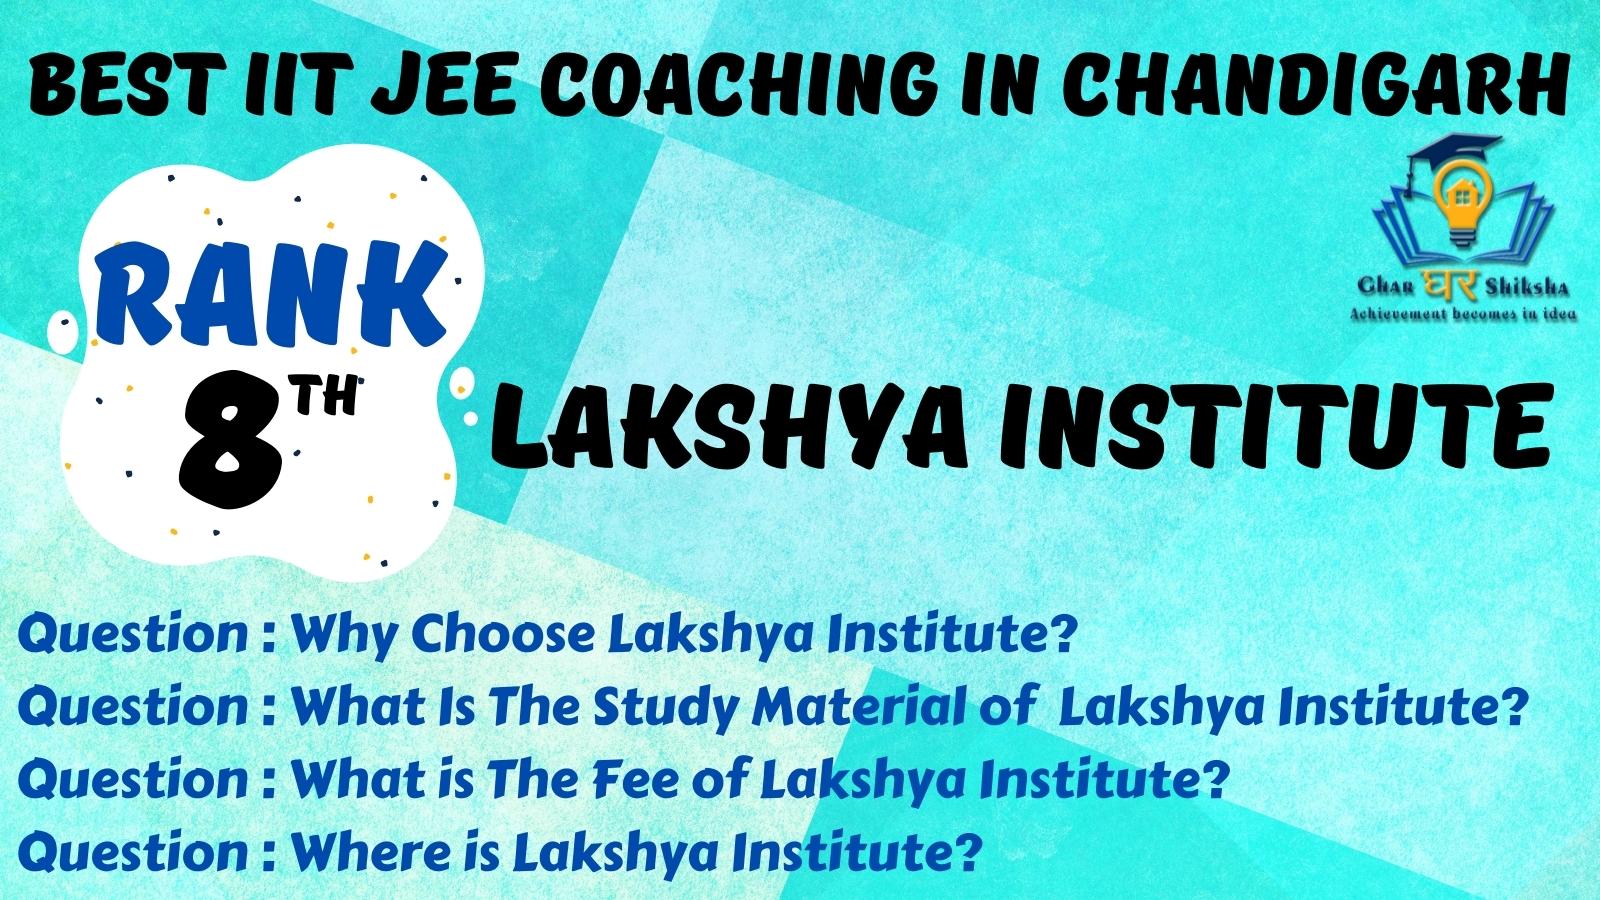 Lakshya Institute For IIT JEE In Chandigarh